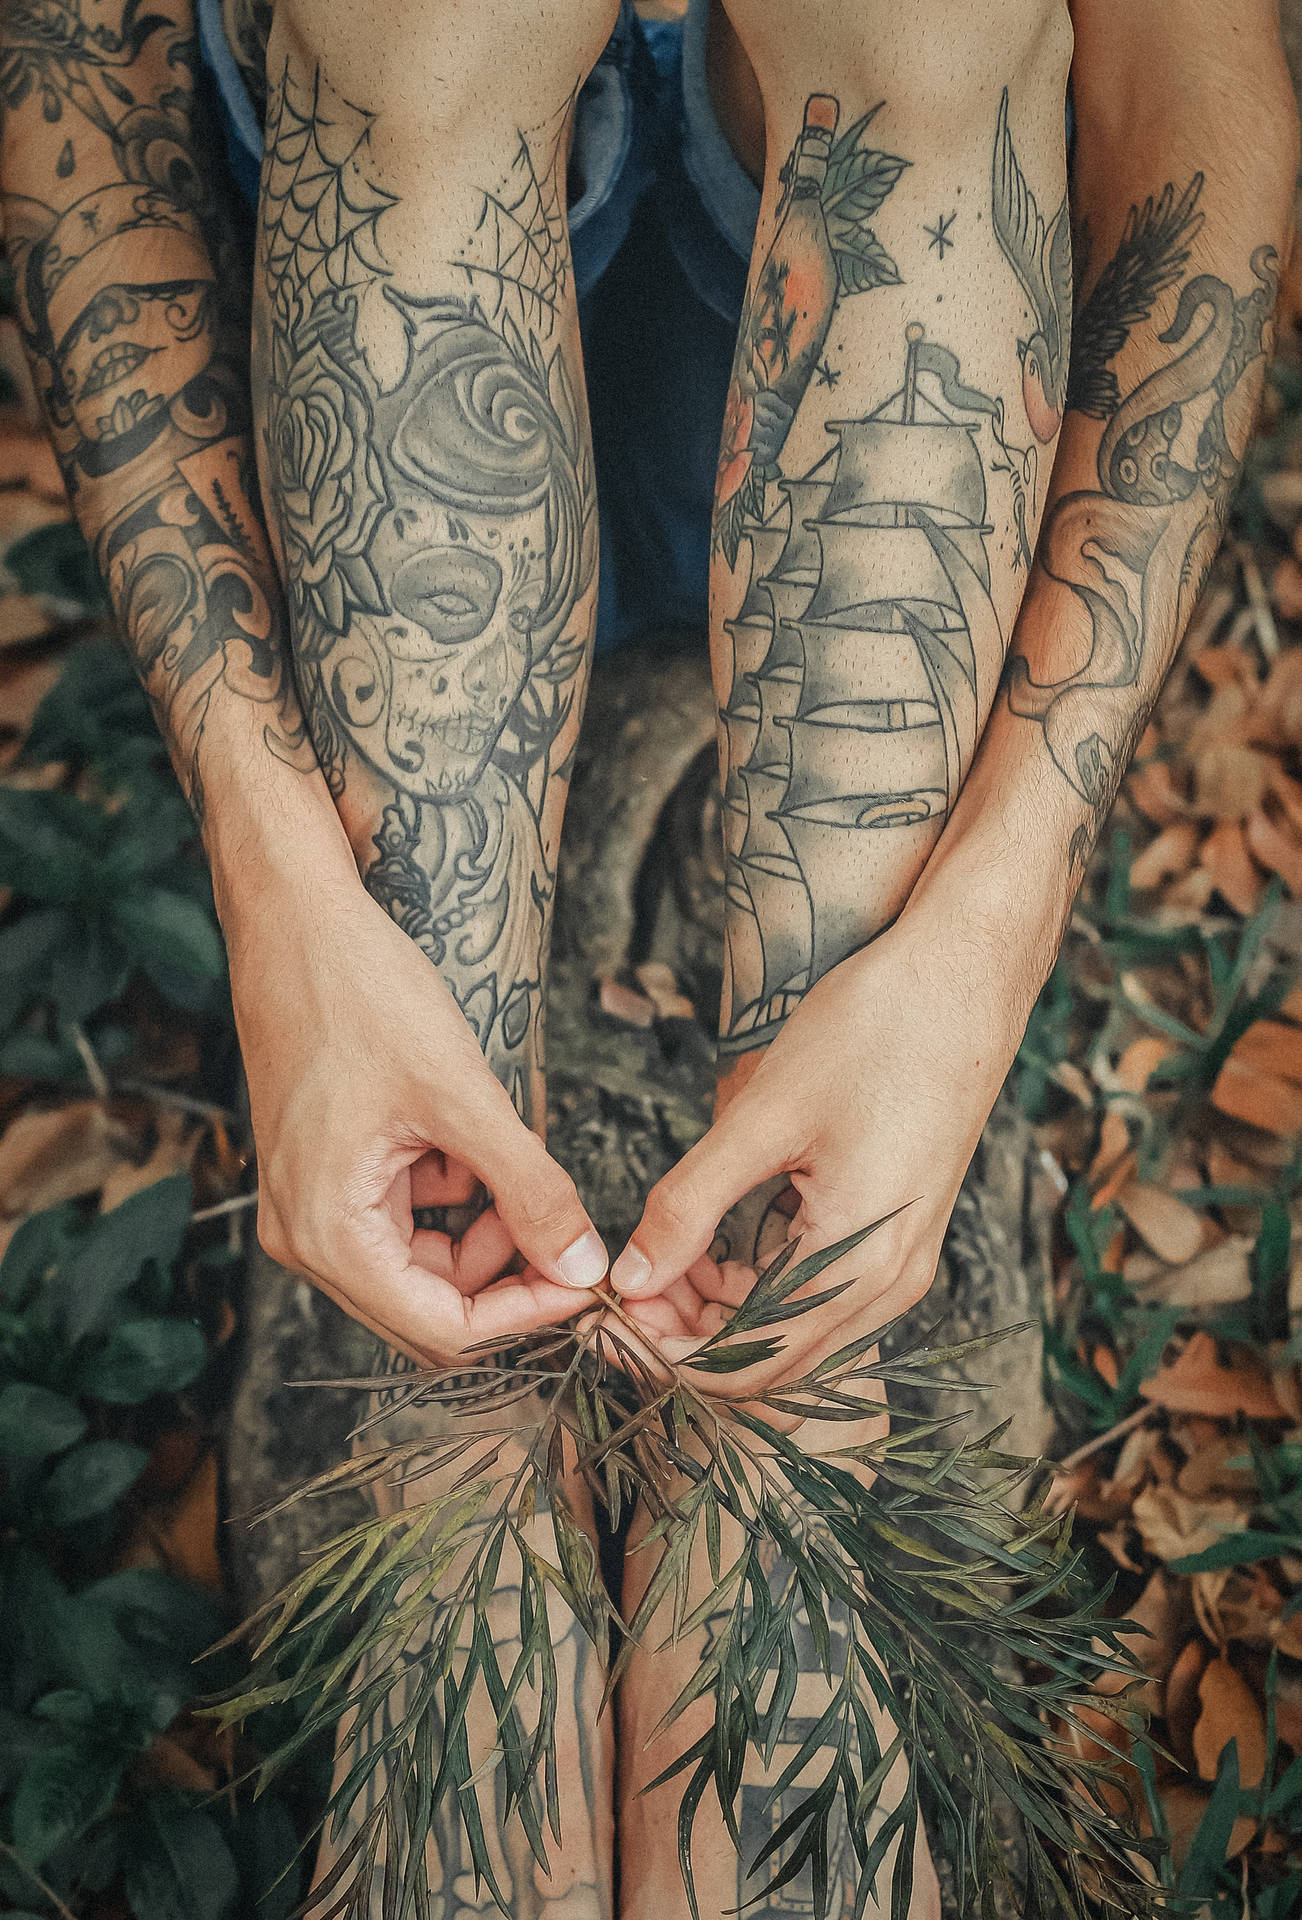 Vibrant Hd Tattoo Designs Adorning Arms And Legs